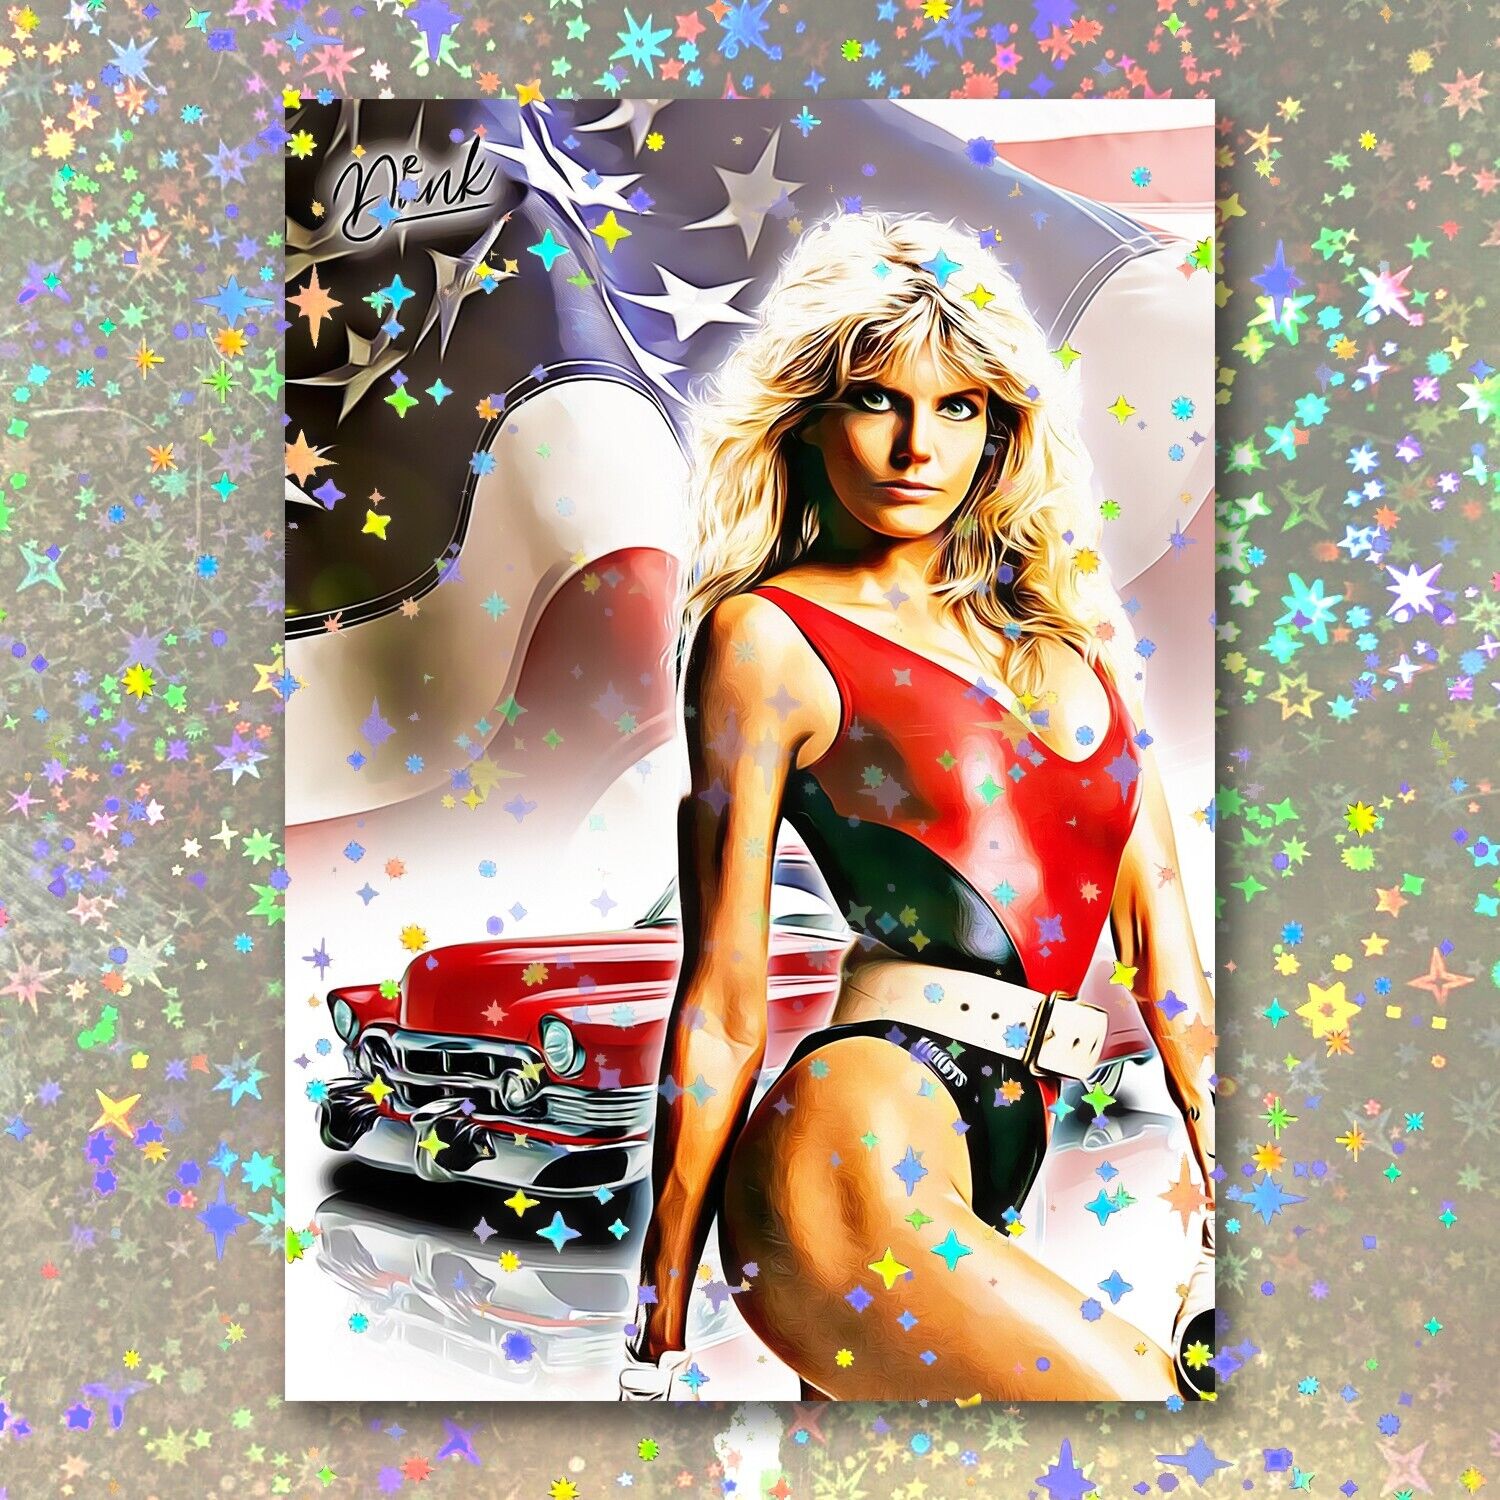 Cheryl Tiegs Holographic Pin-Up Patriot Sketch Card Limited 1/5 Dr. Dunk Signed